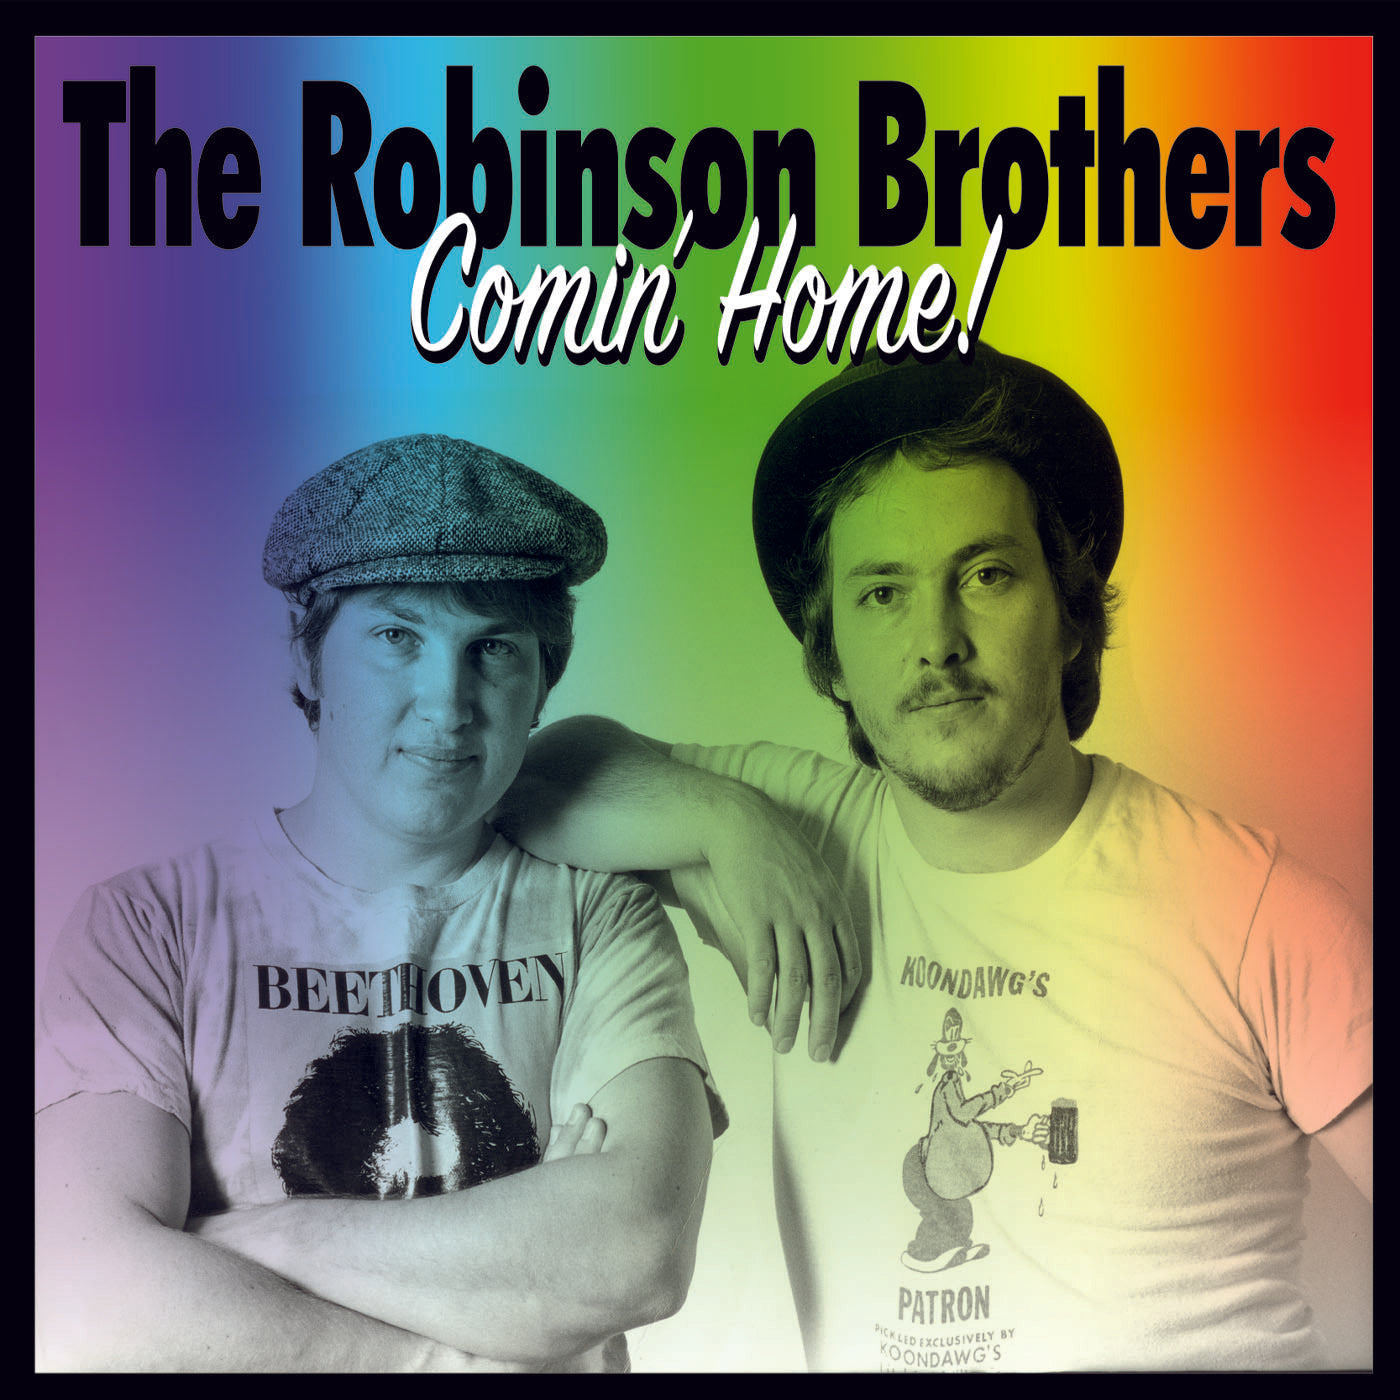 THE ROBINSON BROTHERS Comin Home EP